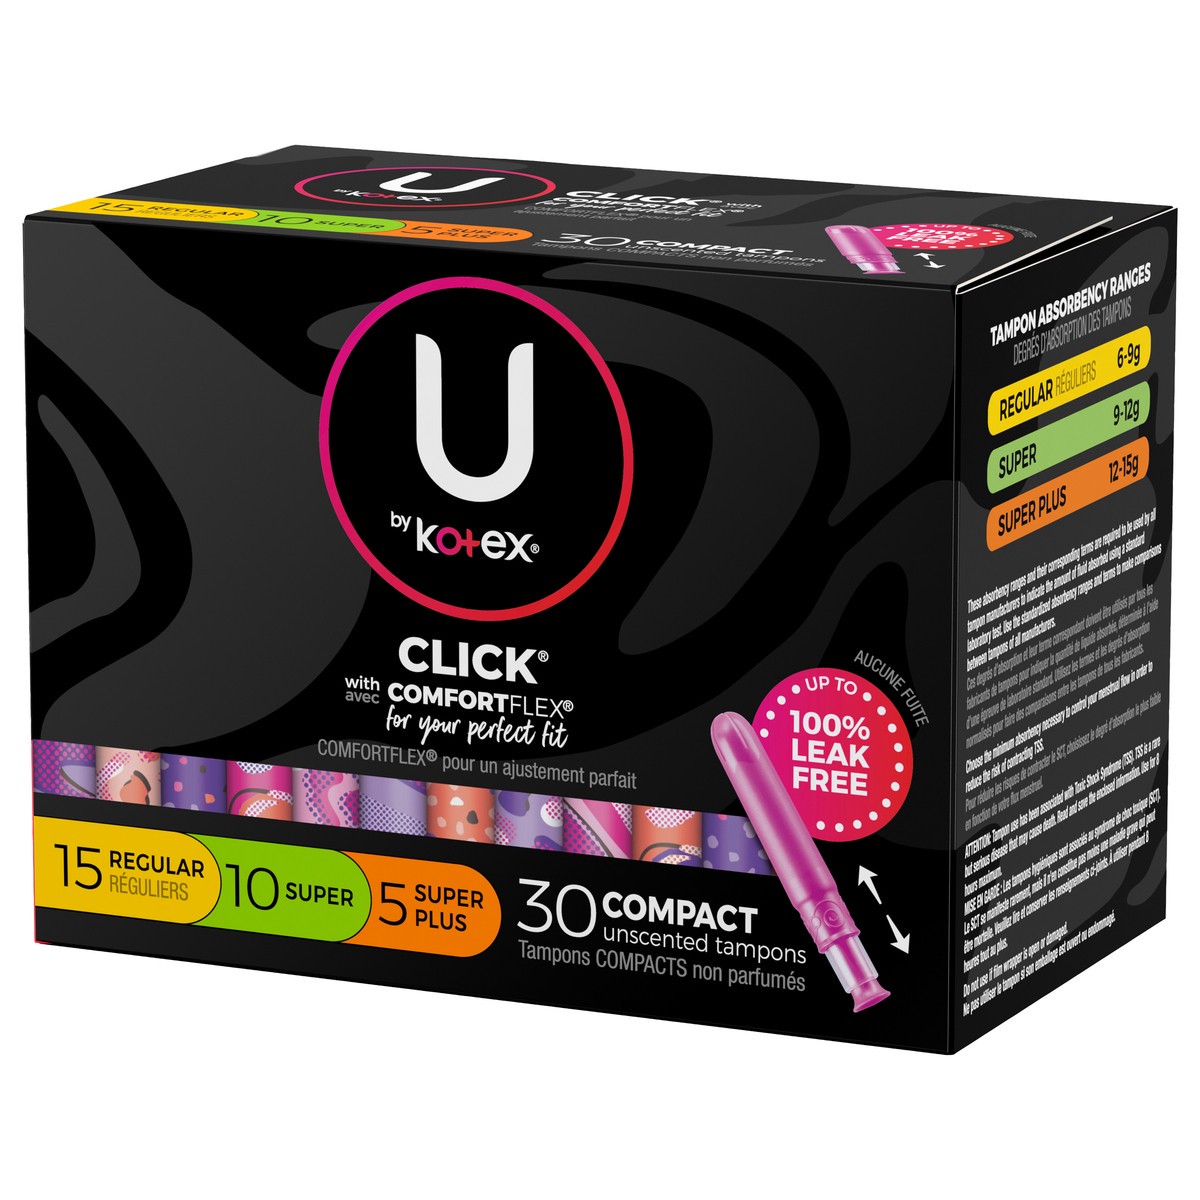 slide 4 of 9, U by Kotex Click Compact Multipack Tampons, Regular/Super/Super Plus, Unscented, 30 Count, 30 ct